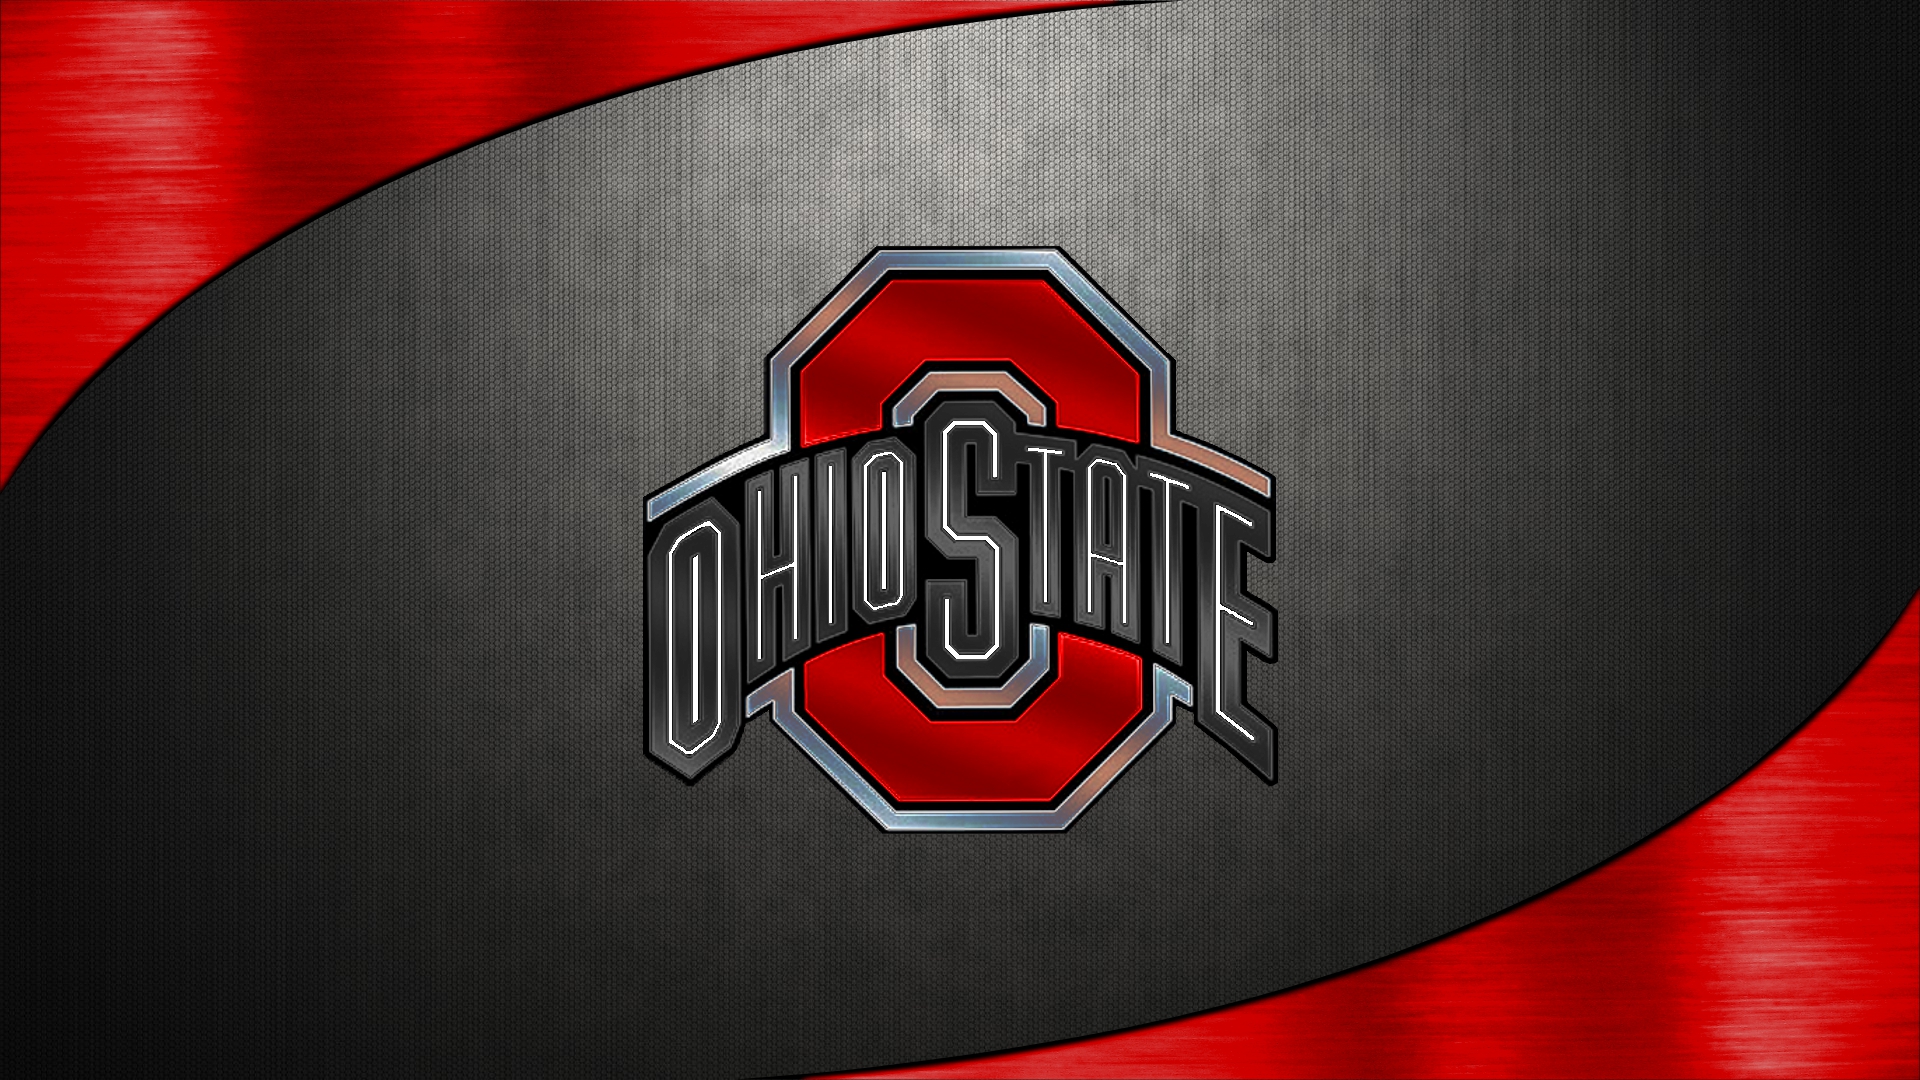 Ohio State Wallpaper Best Cars Res